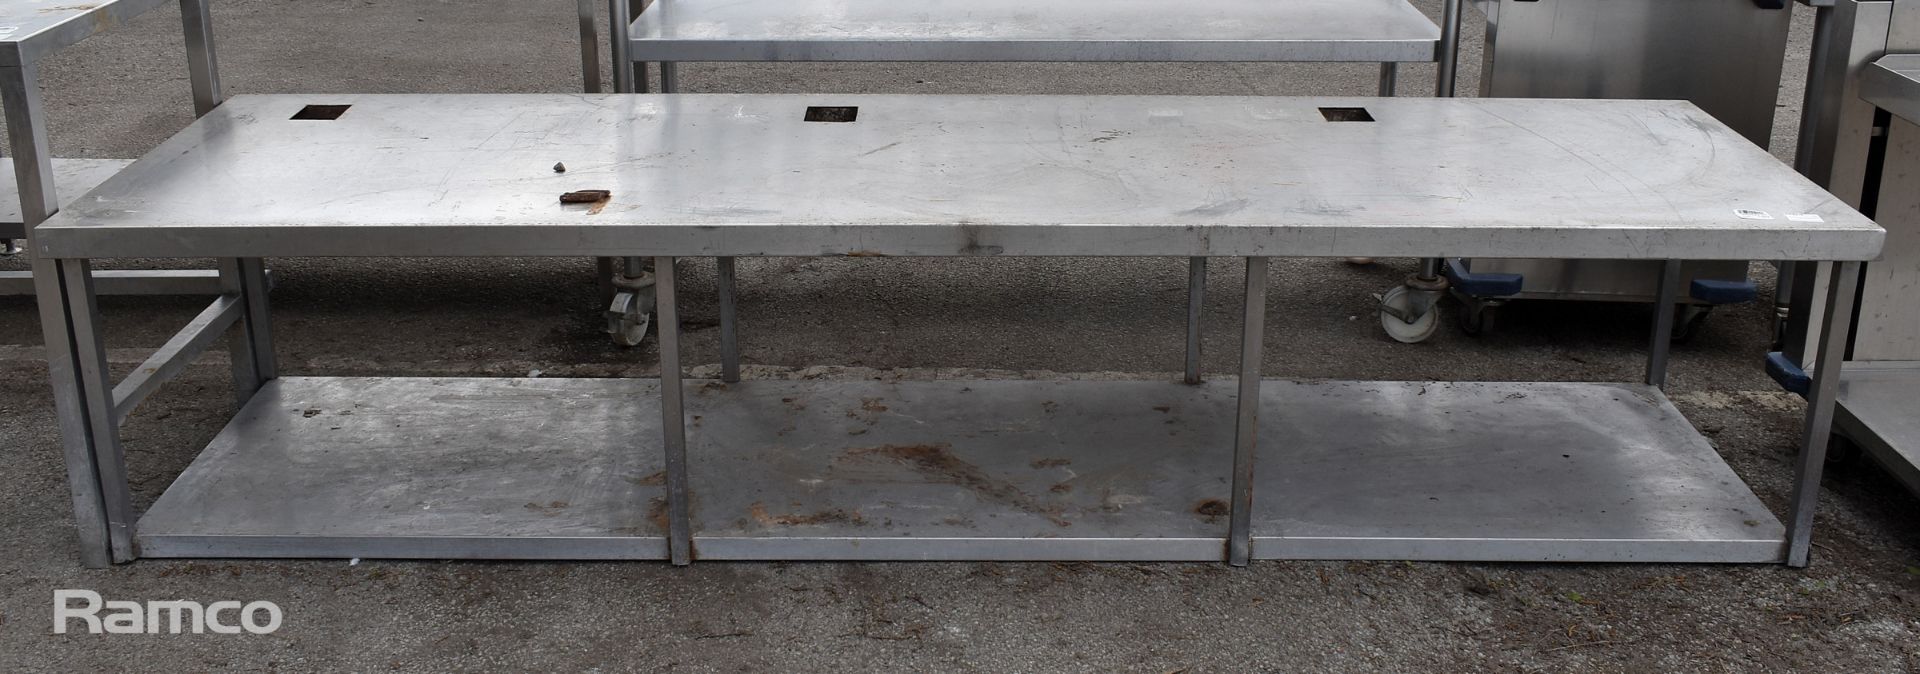 Stainless steel table - W 2850 x D 660 x H 620mm